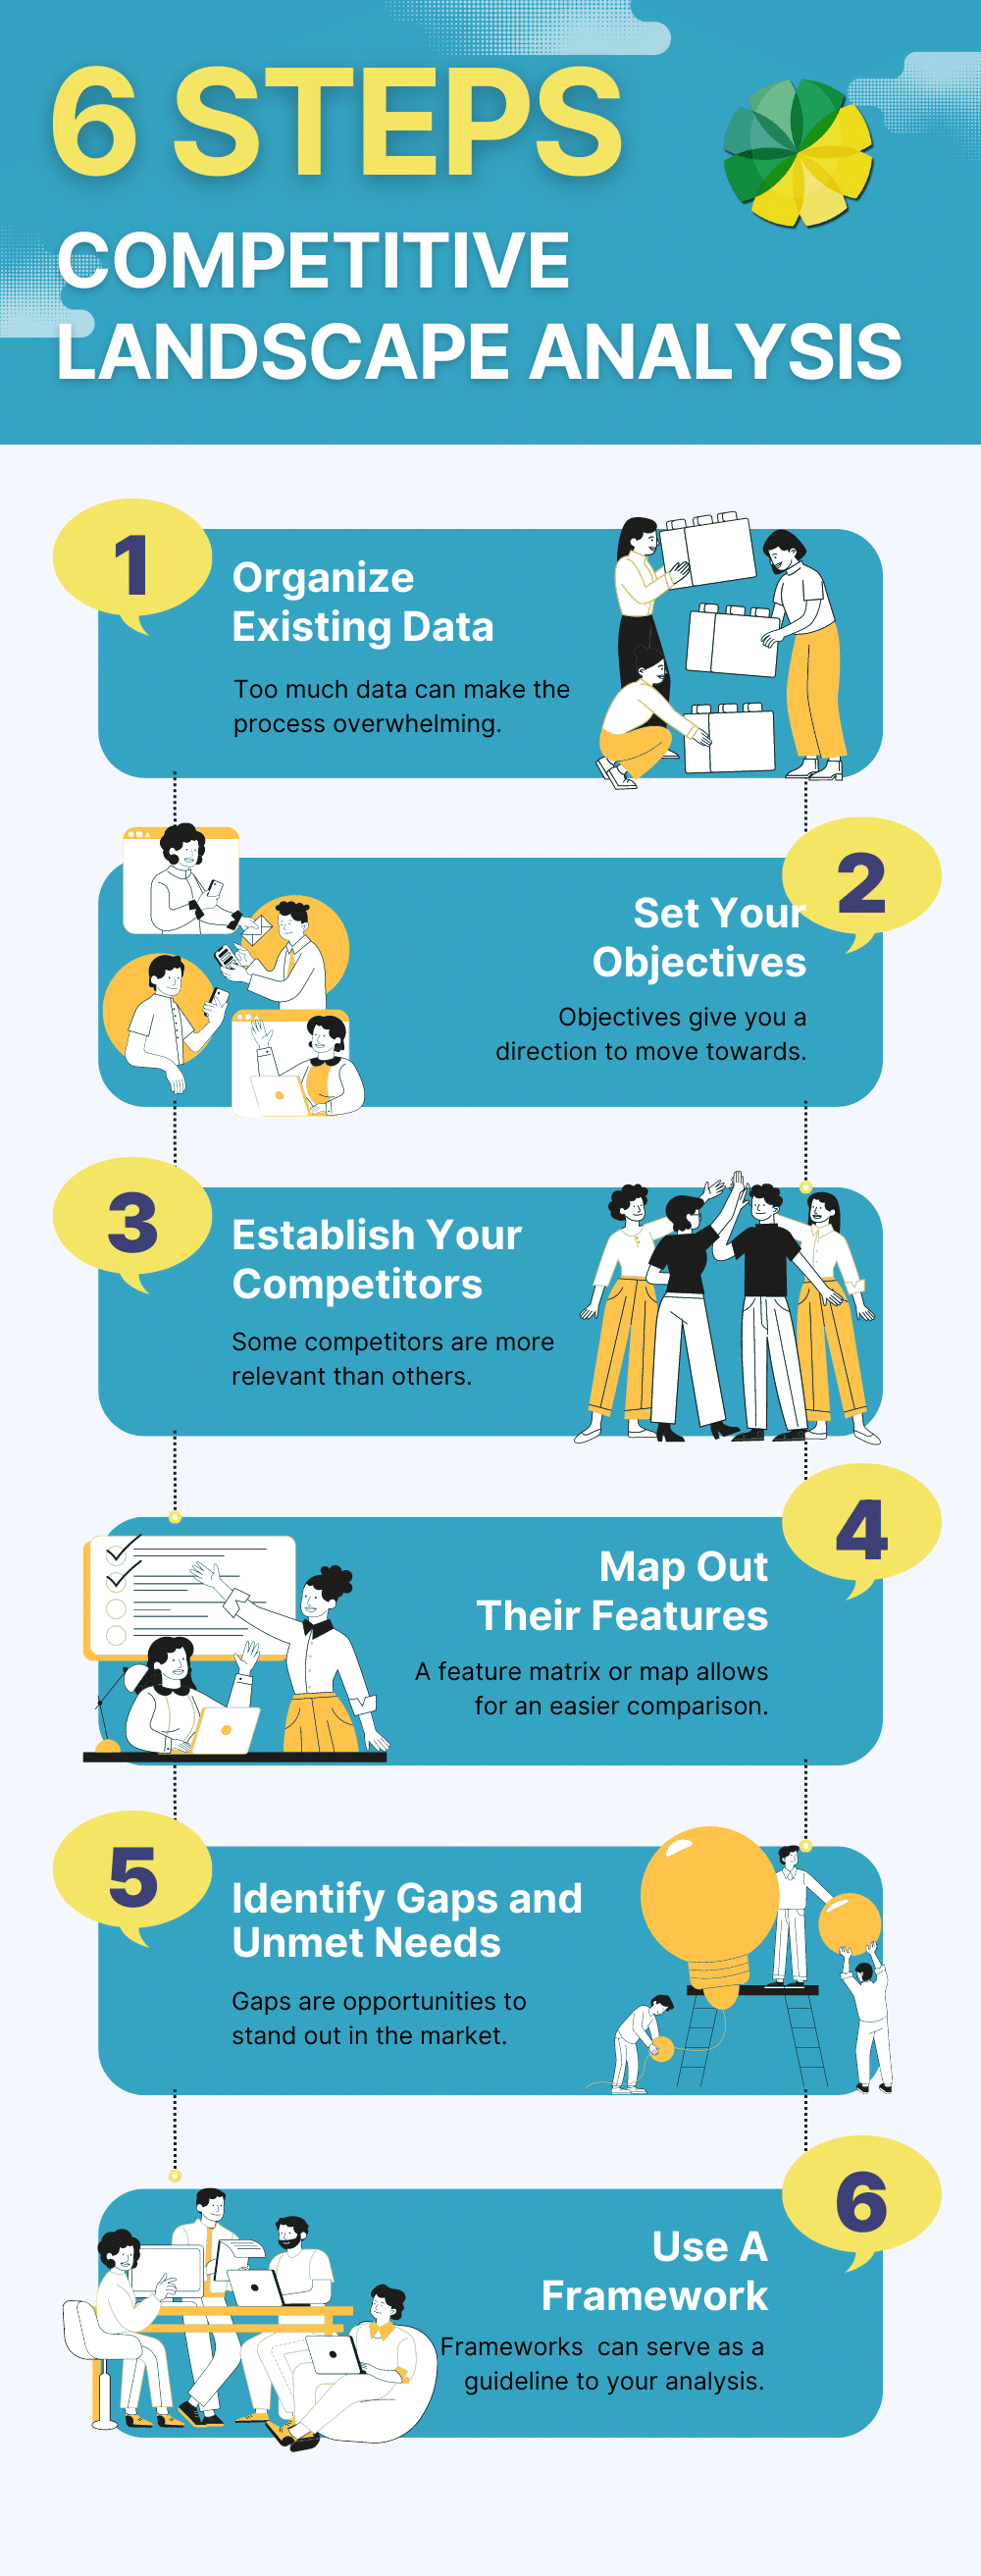 Competitive Landscape Analysis Step-by-Step Guide